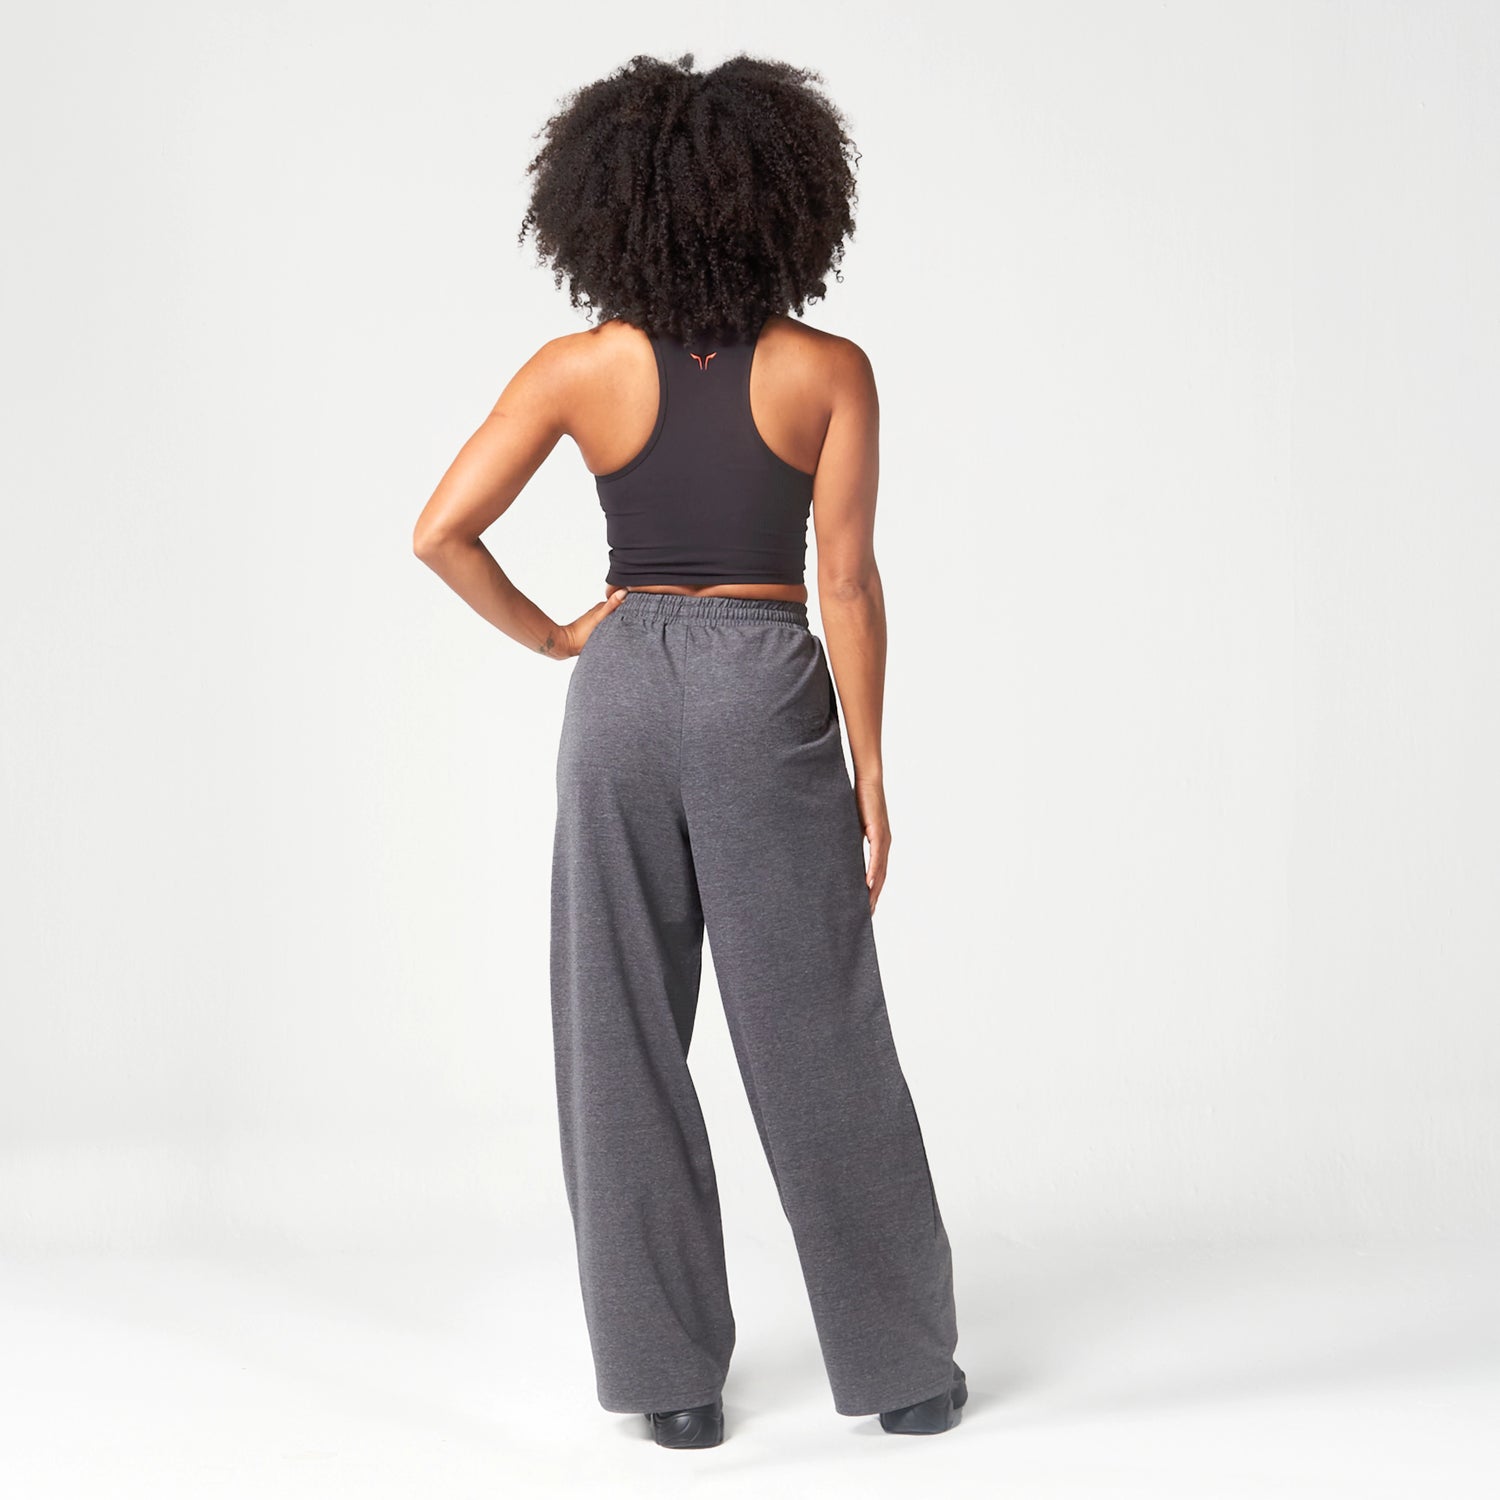 AE, Code Live in Joggers - Black Marl, Workout Pants Women